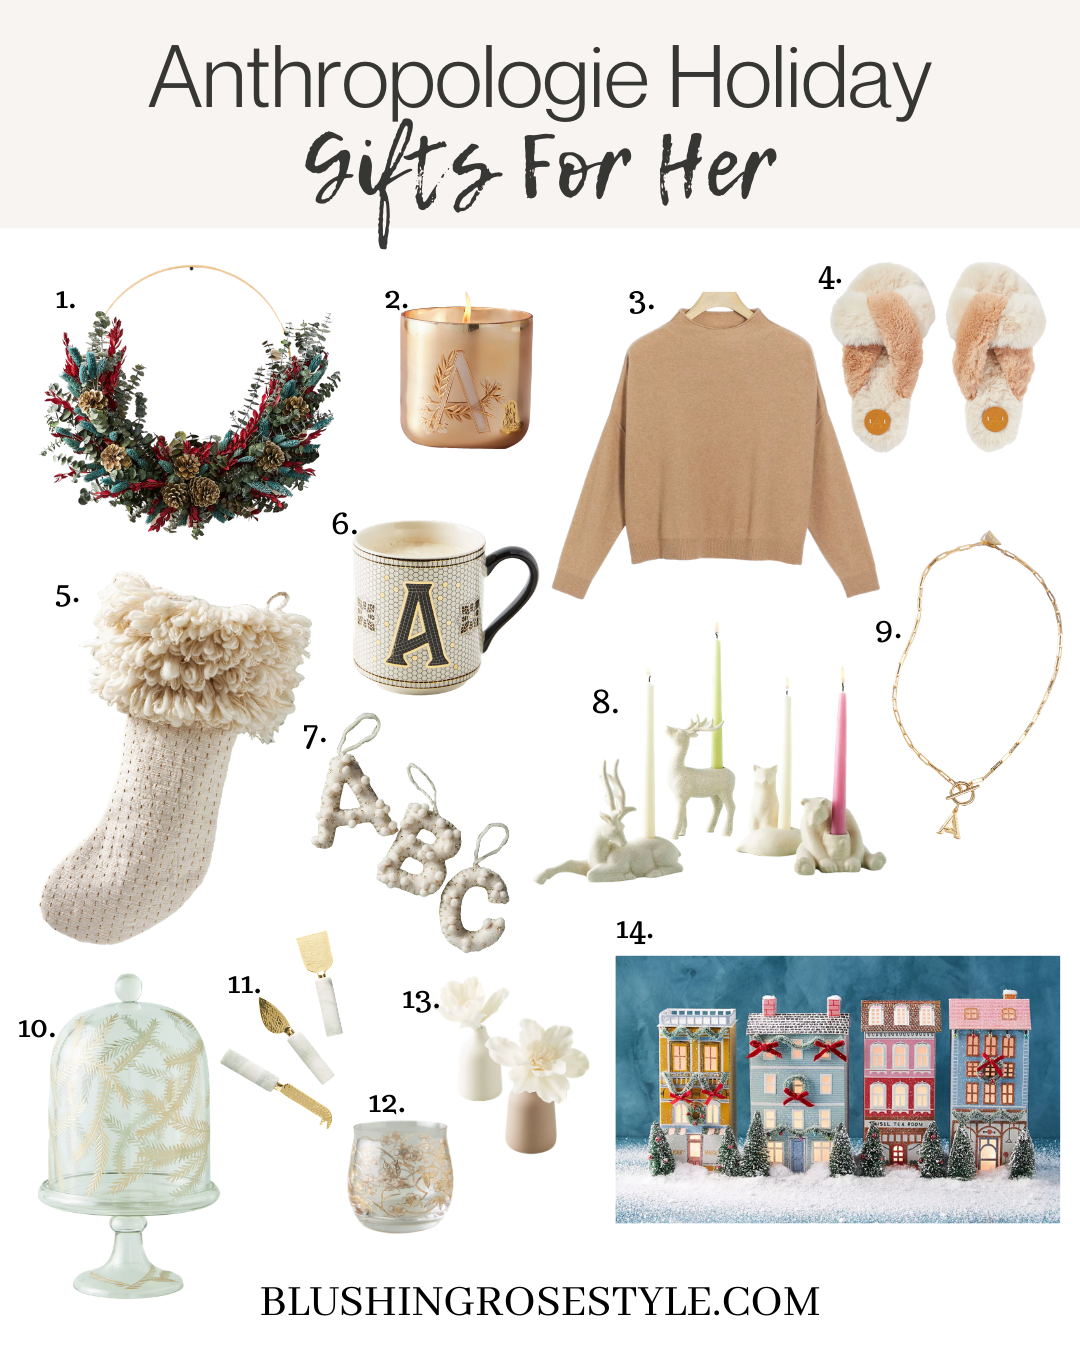 Gifts For Her: Under $50 and Under $100